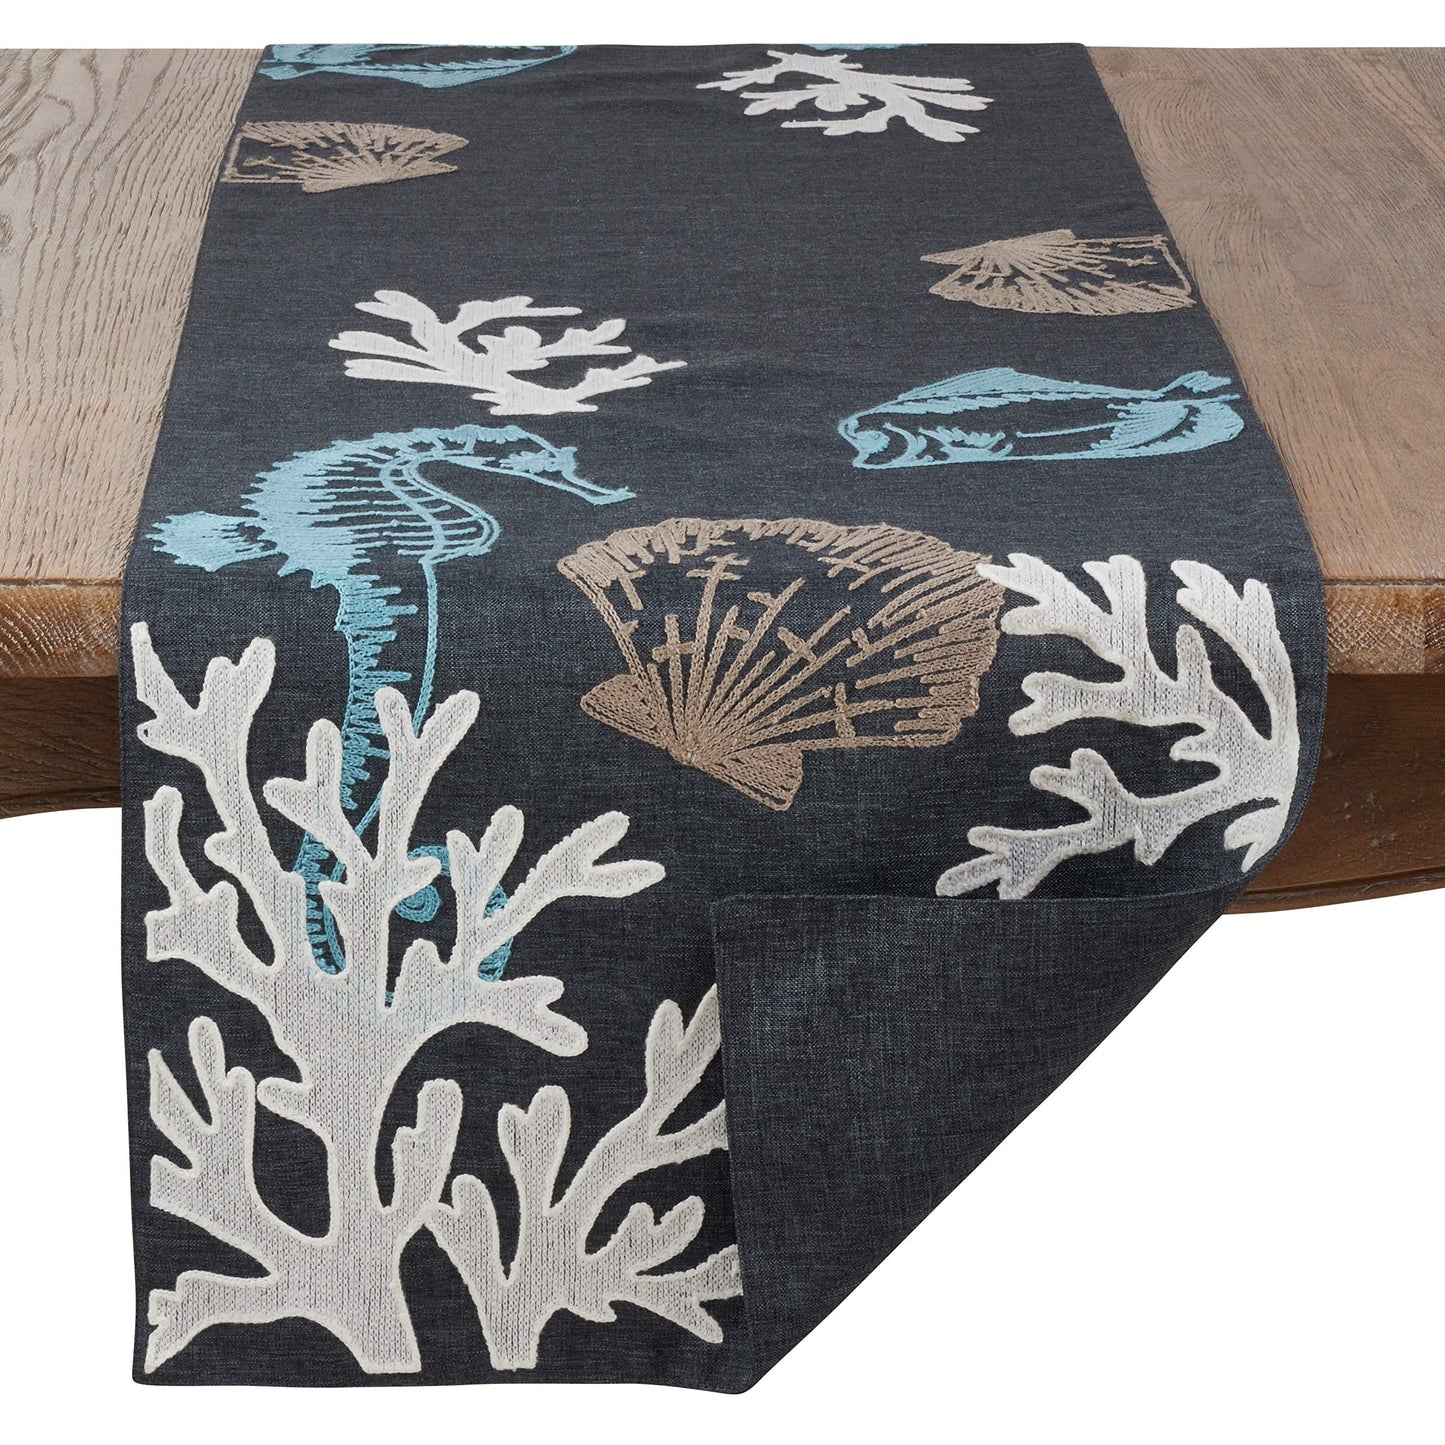 Fennco Styles Coastal Collection Sea Life Embroidered Table Runner 16 x 70 Inch - Navy Blue Table Cover for Everyday Use, Family Gathering, Banquets and Special Occasion